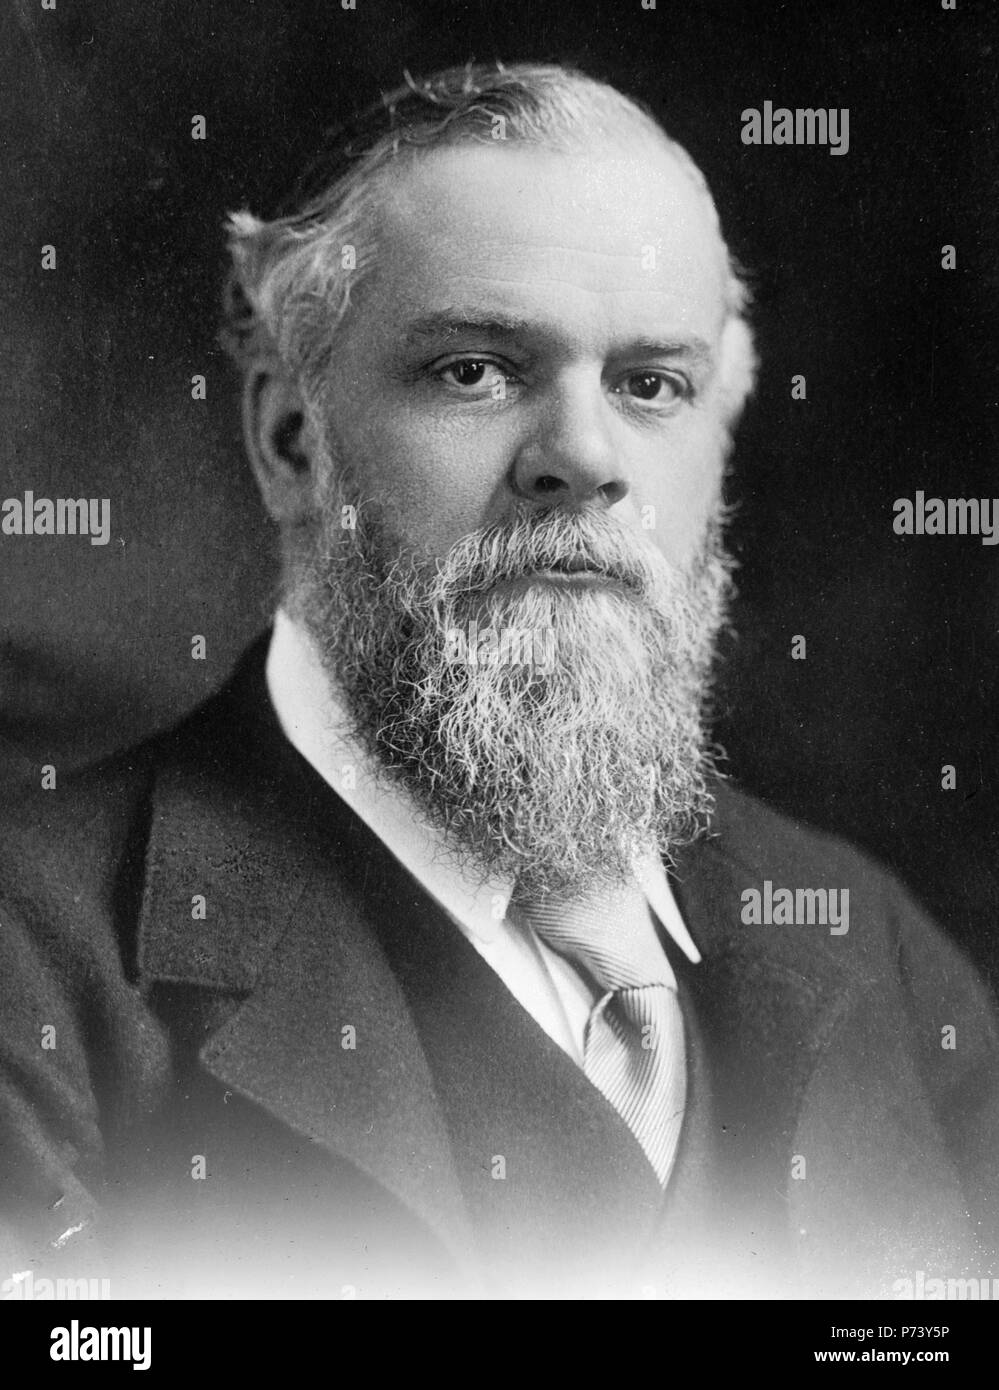 Earl of Elgin, Secretary of State for the Colonies, portrait Stock Photo